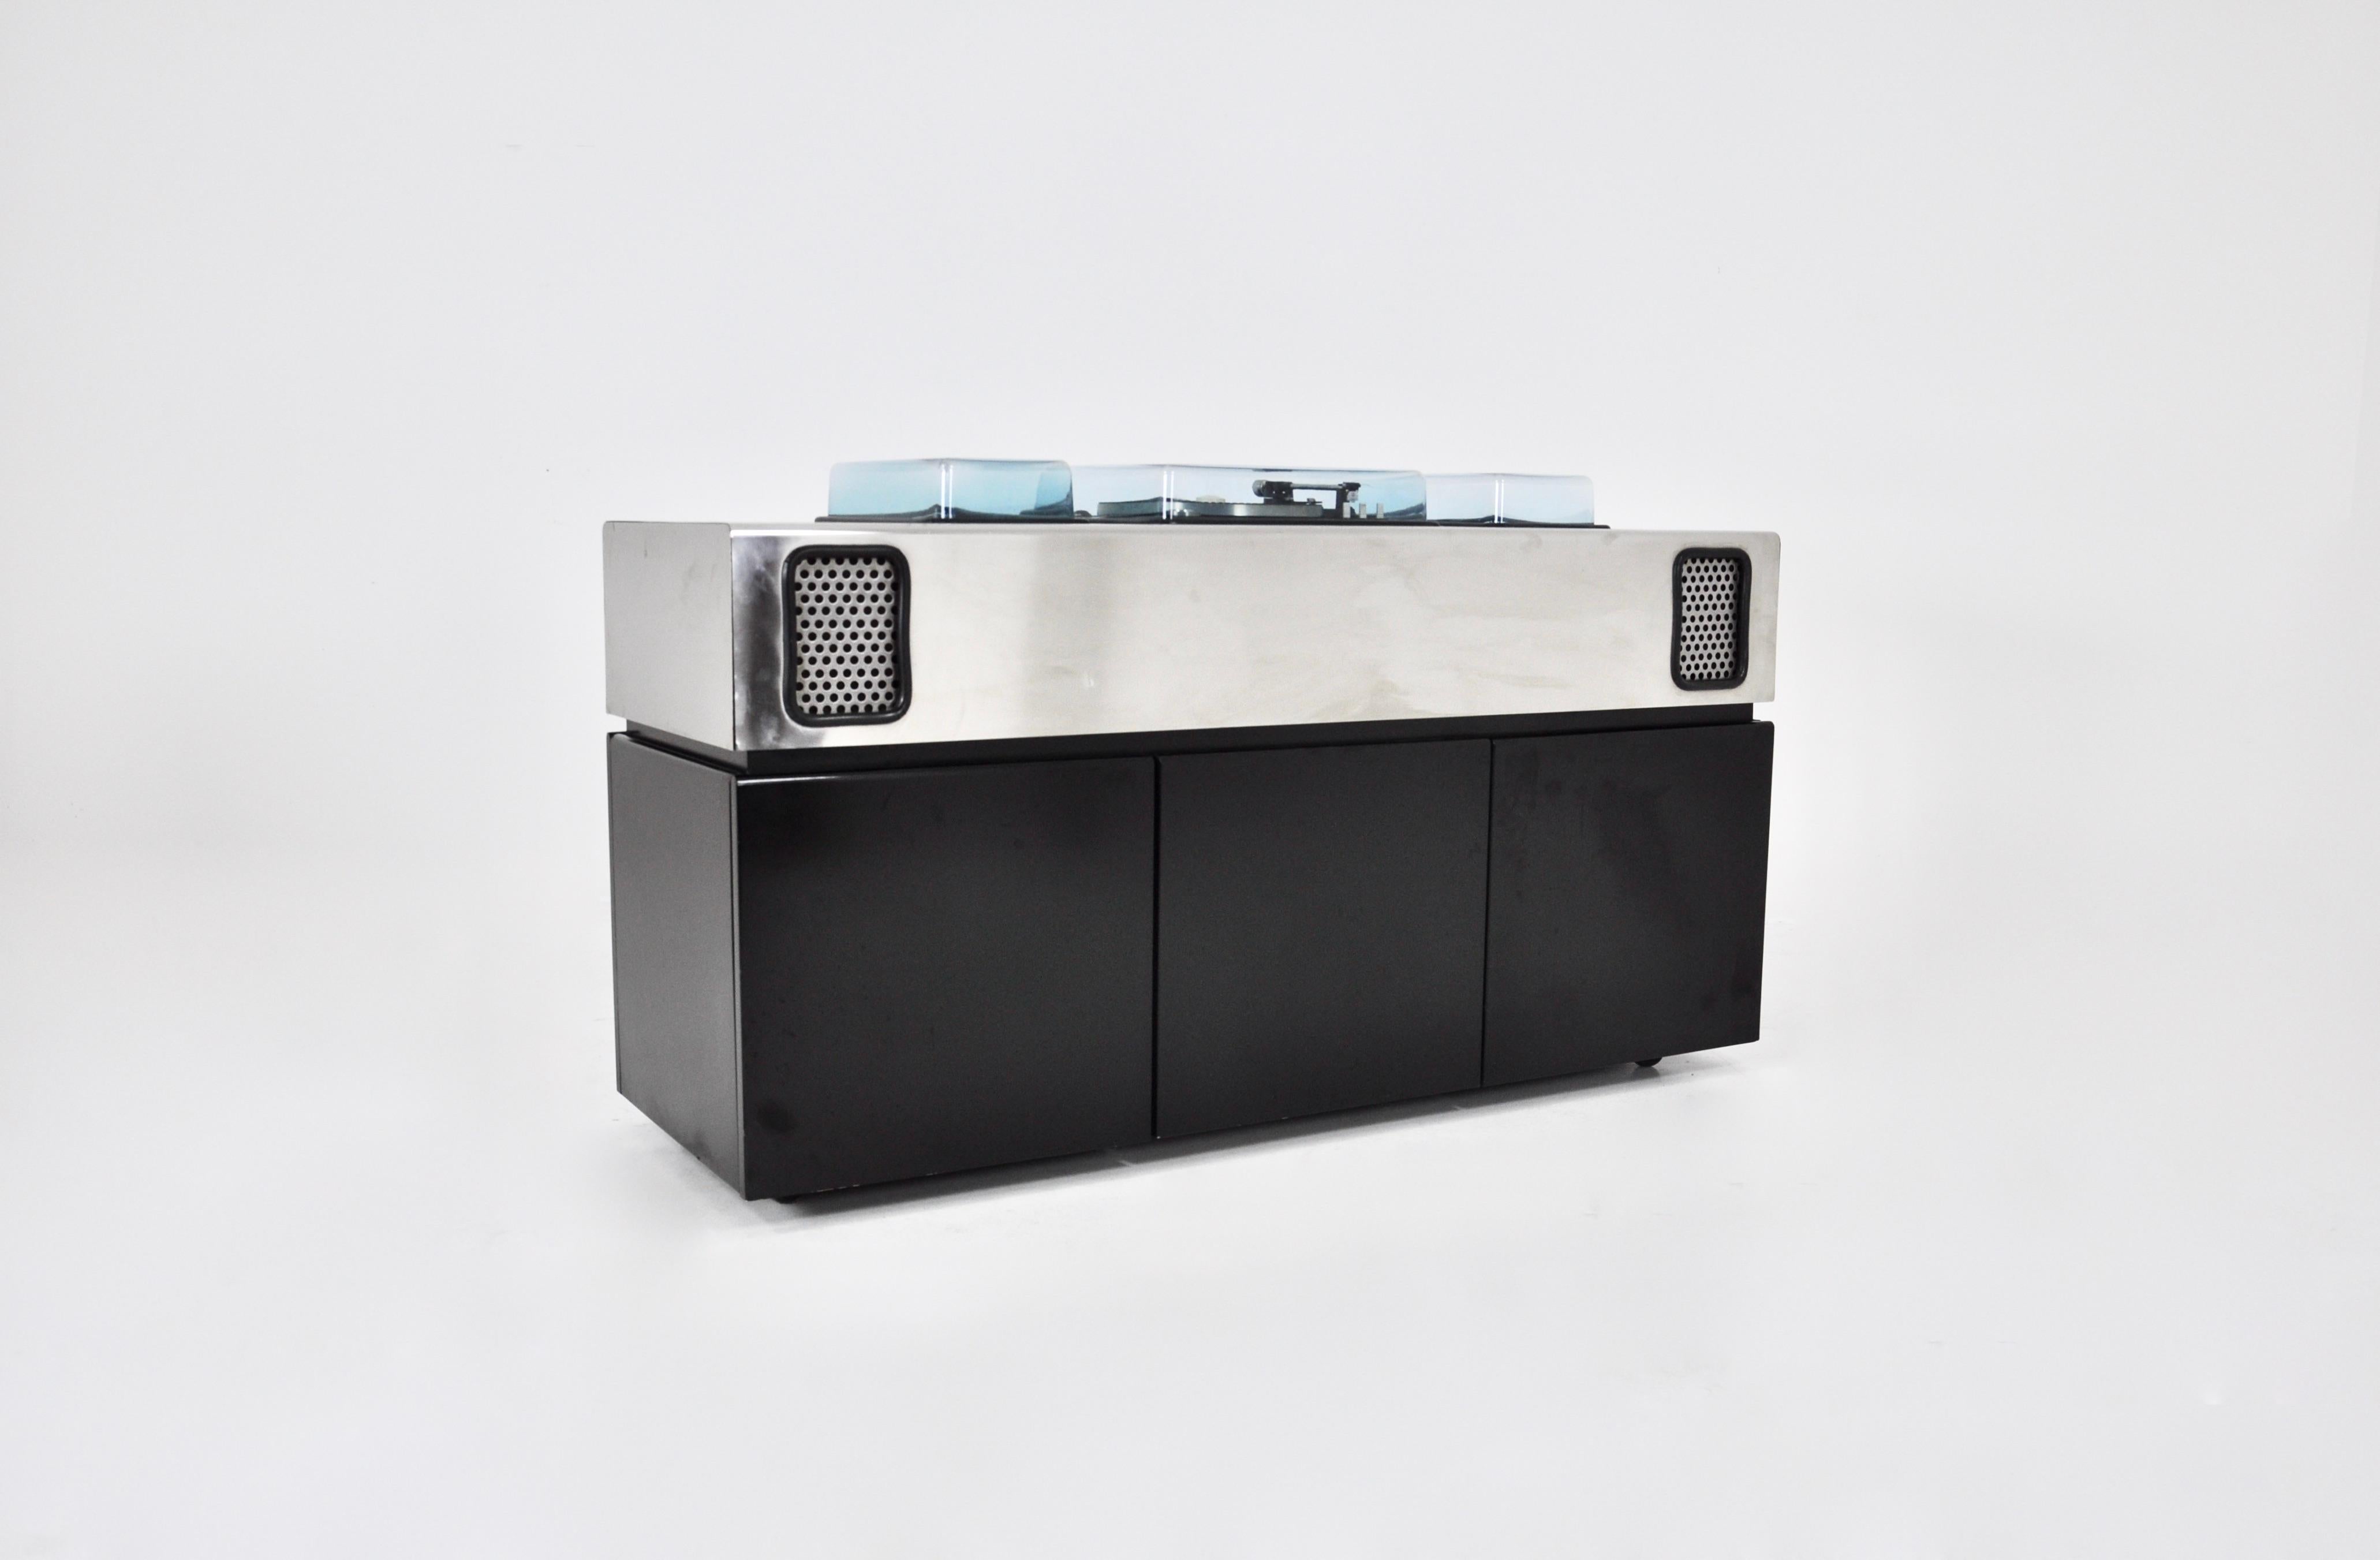 Batman record player, radio and bar by Adalberto dal Lago & Adam Tihany for Giuseppe Rossi. The top is in brushed chrome metal with integrated speakers and the underside in black wood. There are two storage drawers and a fridge in the middle.